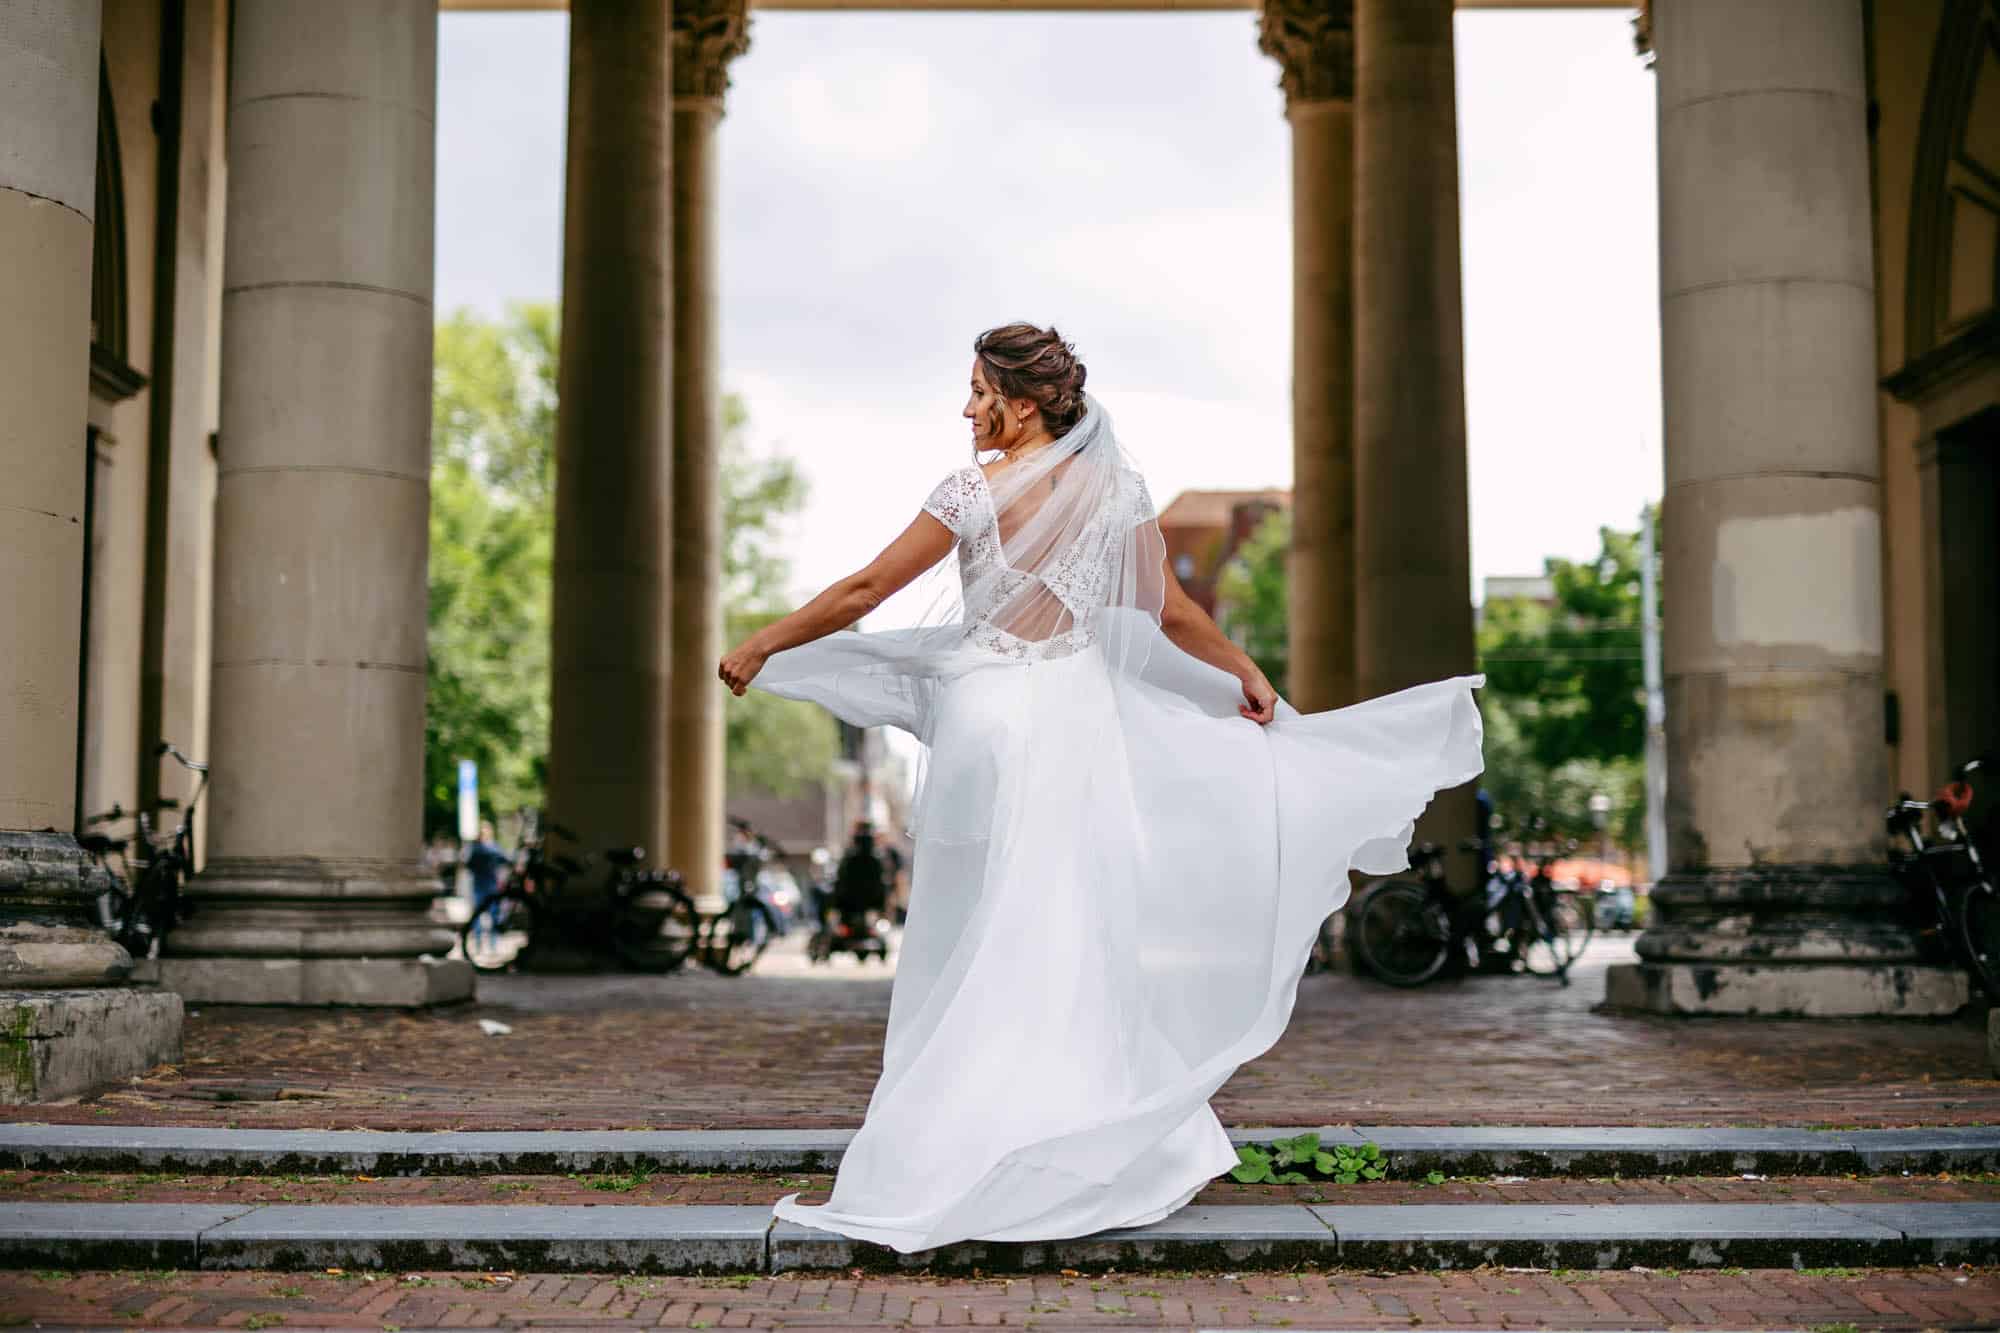 A Bohemian bride in a white dress walks down the steps of an old building.